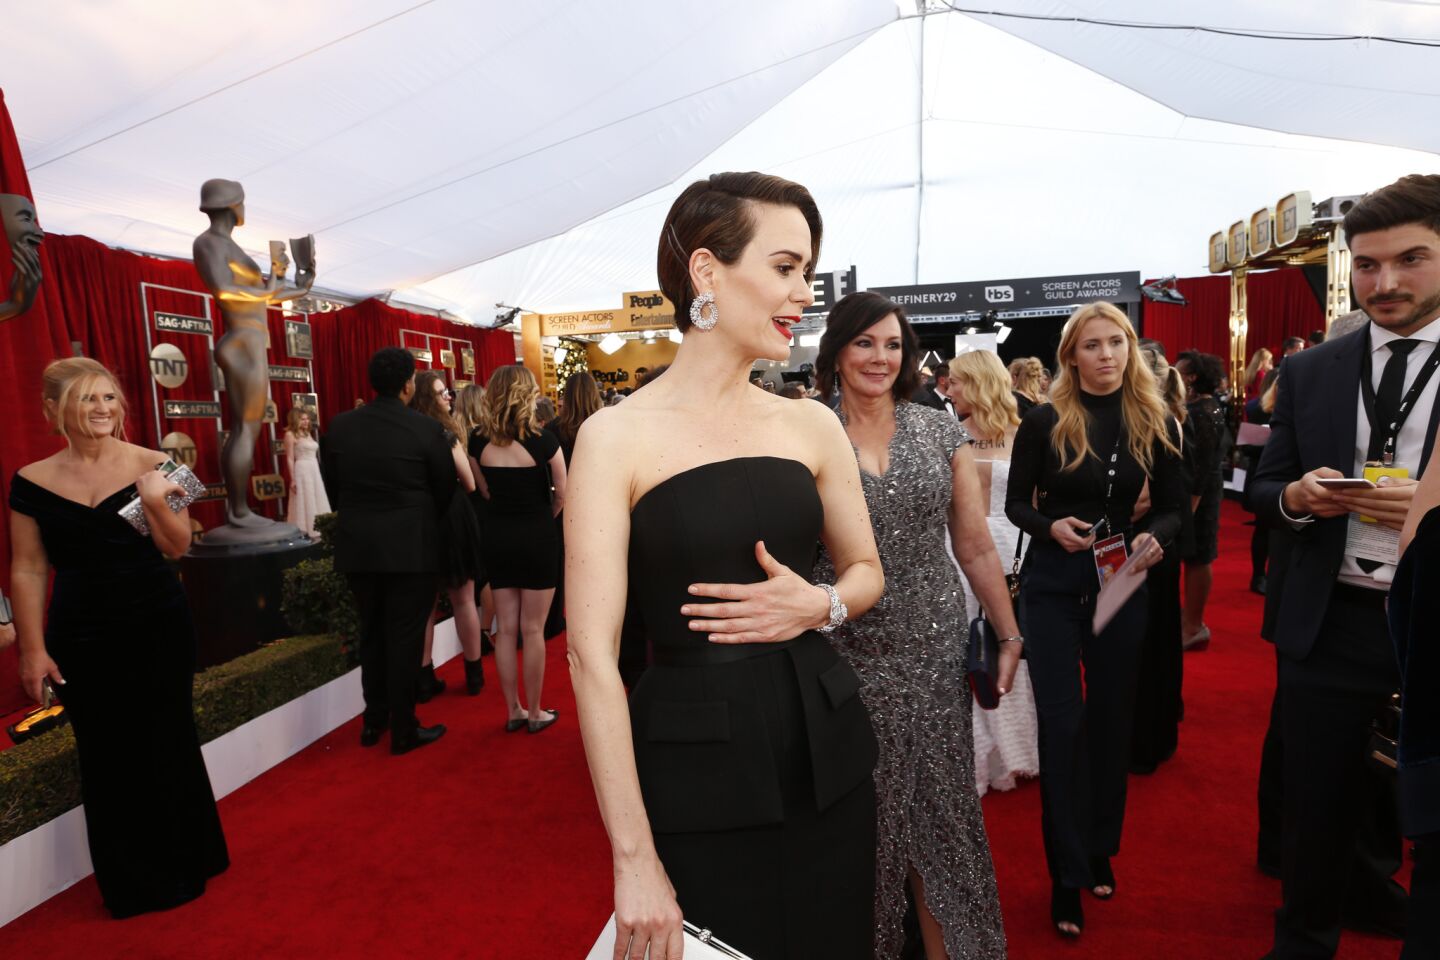 Sarah Paulson, a nominee for "The People v. O.J. Simpson: American Crime Story," arrives with the real-life Simpson prosecutor she played, Marcia Clark.